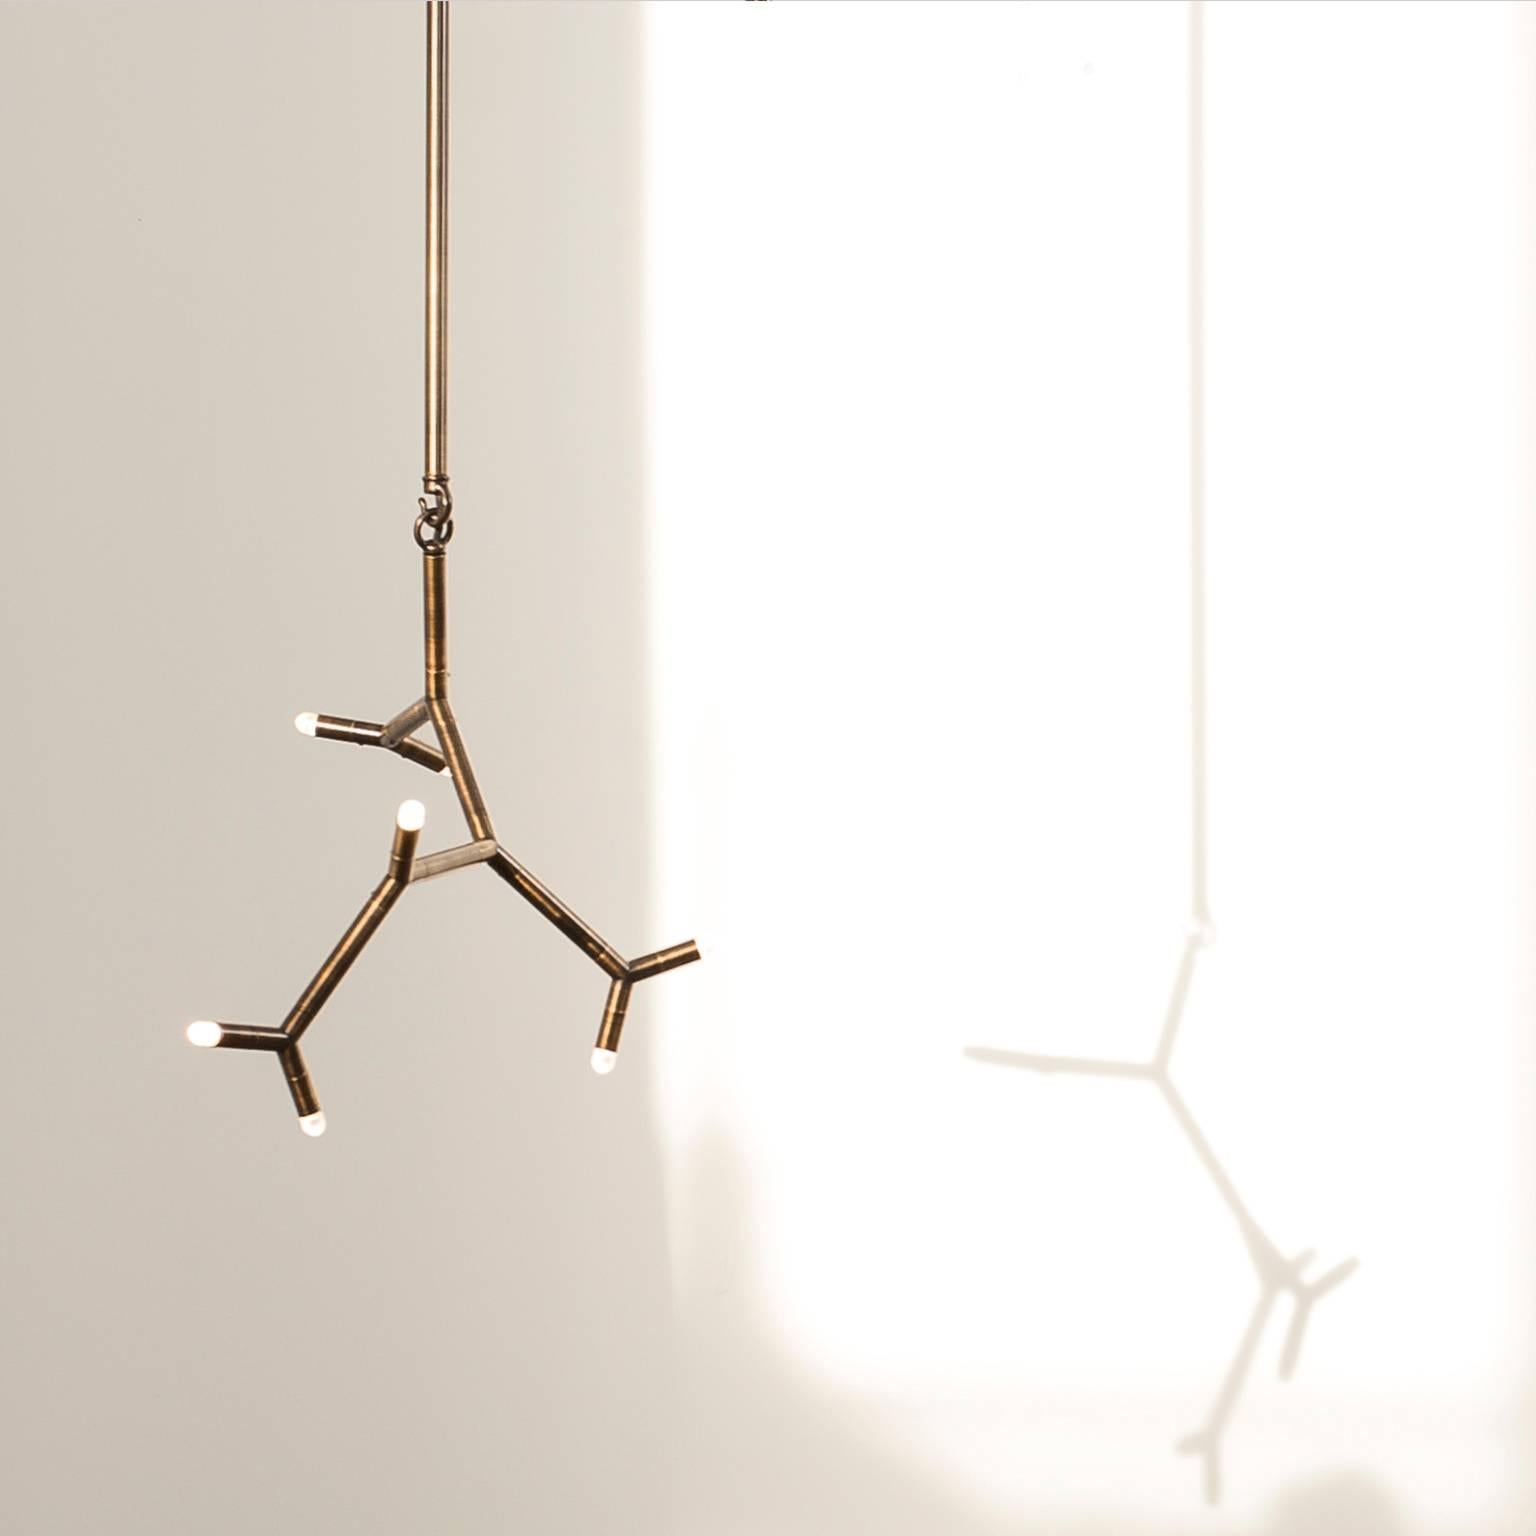 Exhibiting a primary element in repetition, the Ursa Minor pendant takes inspiration from both molecular forms and constellations. The modern pendant offers multiple points of light on an intimate scale, a focal point in open space. This light